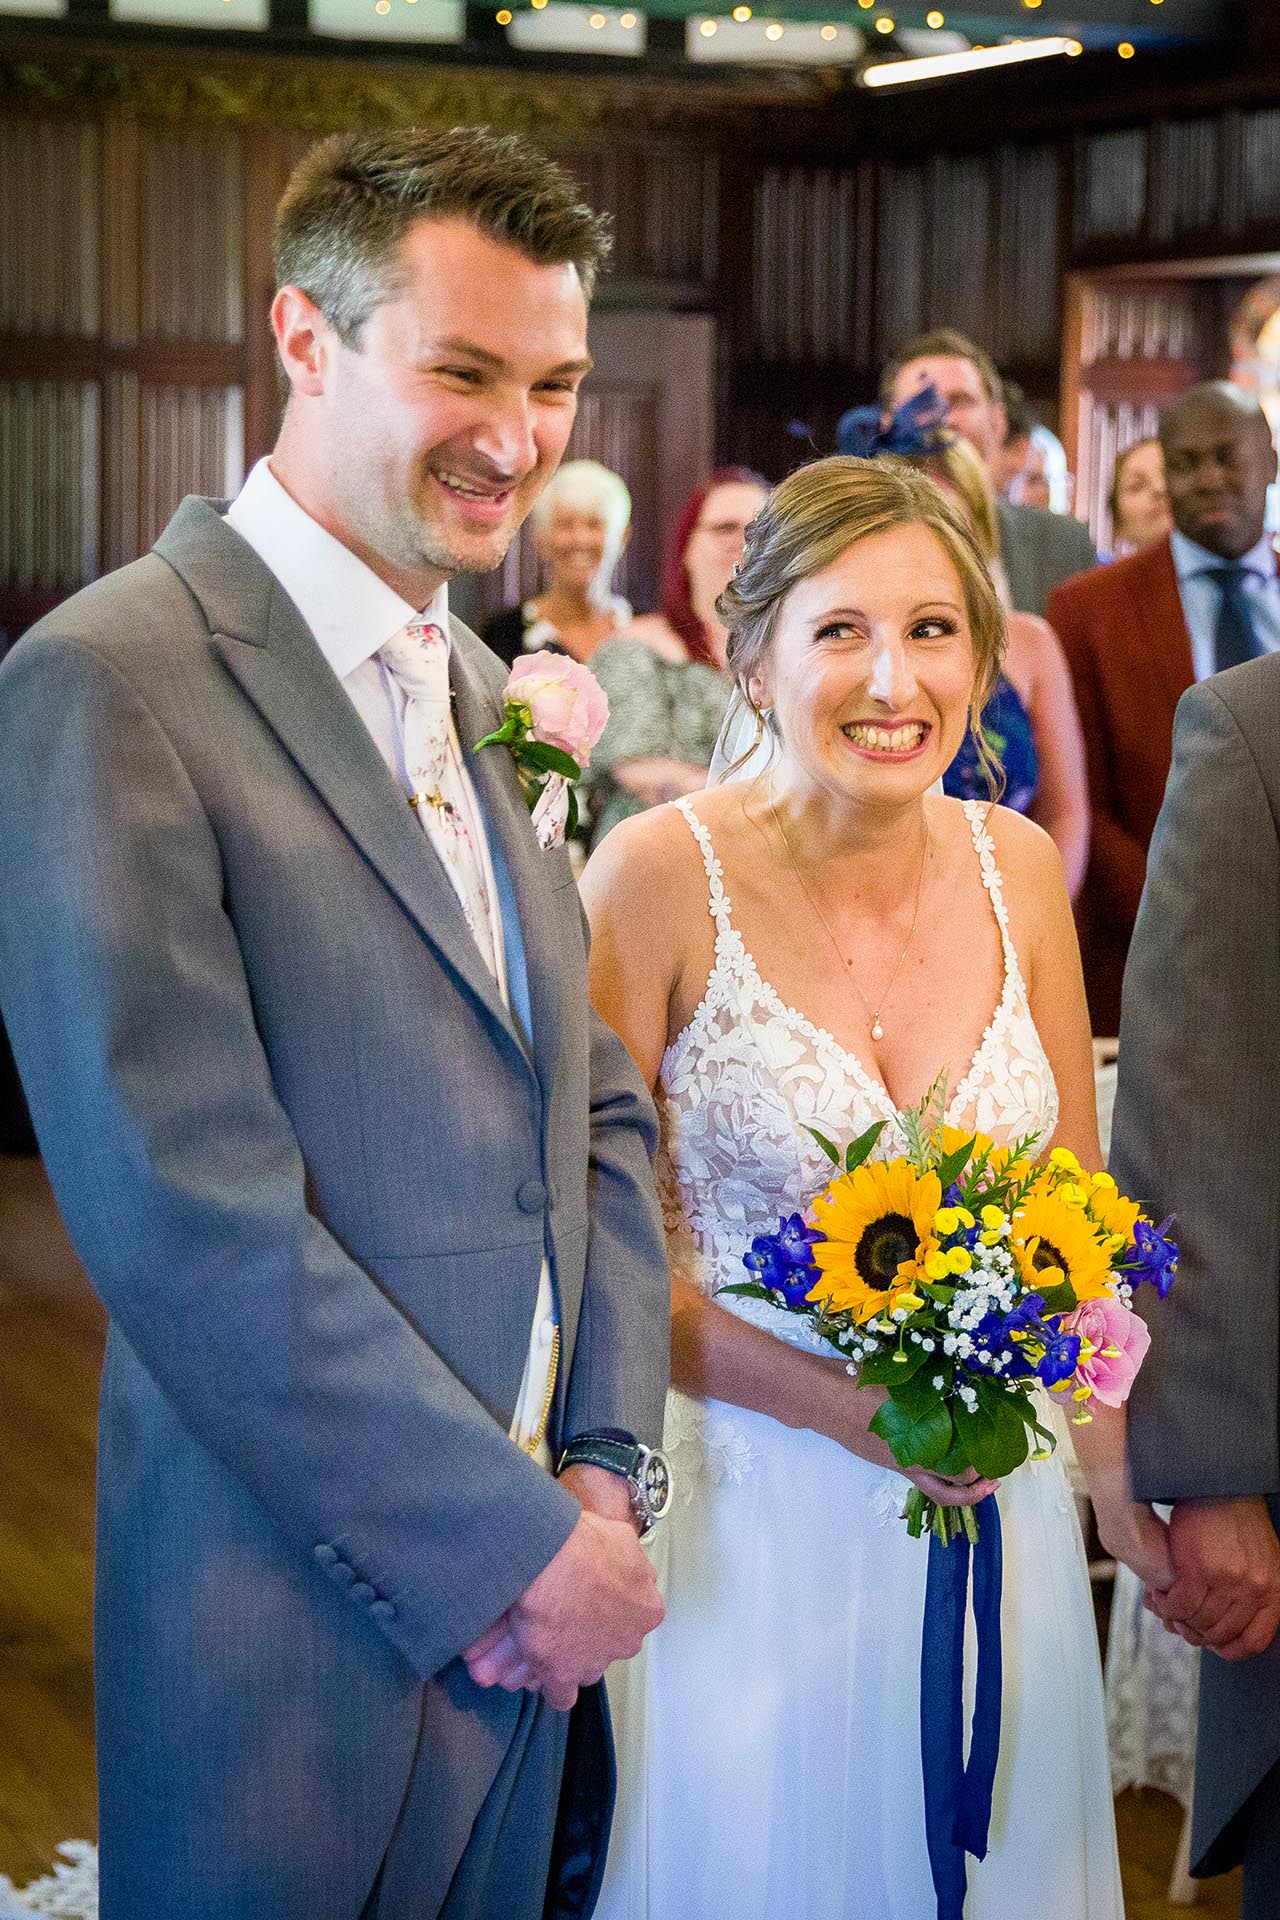 Bride and groom during their wedding ceremony at Leez Priory, Great Leighs, Chelmsford